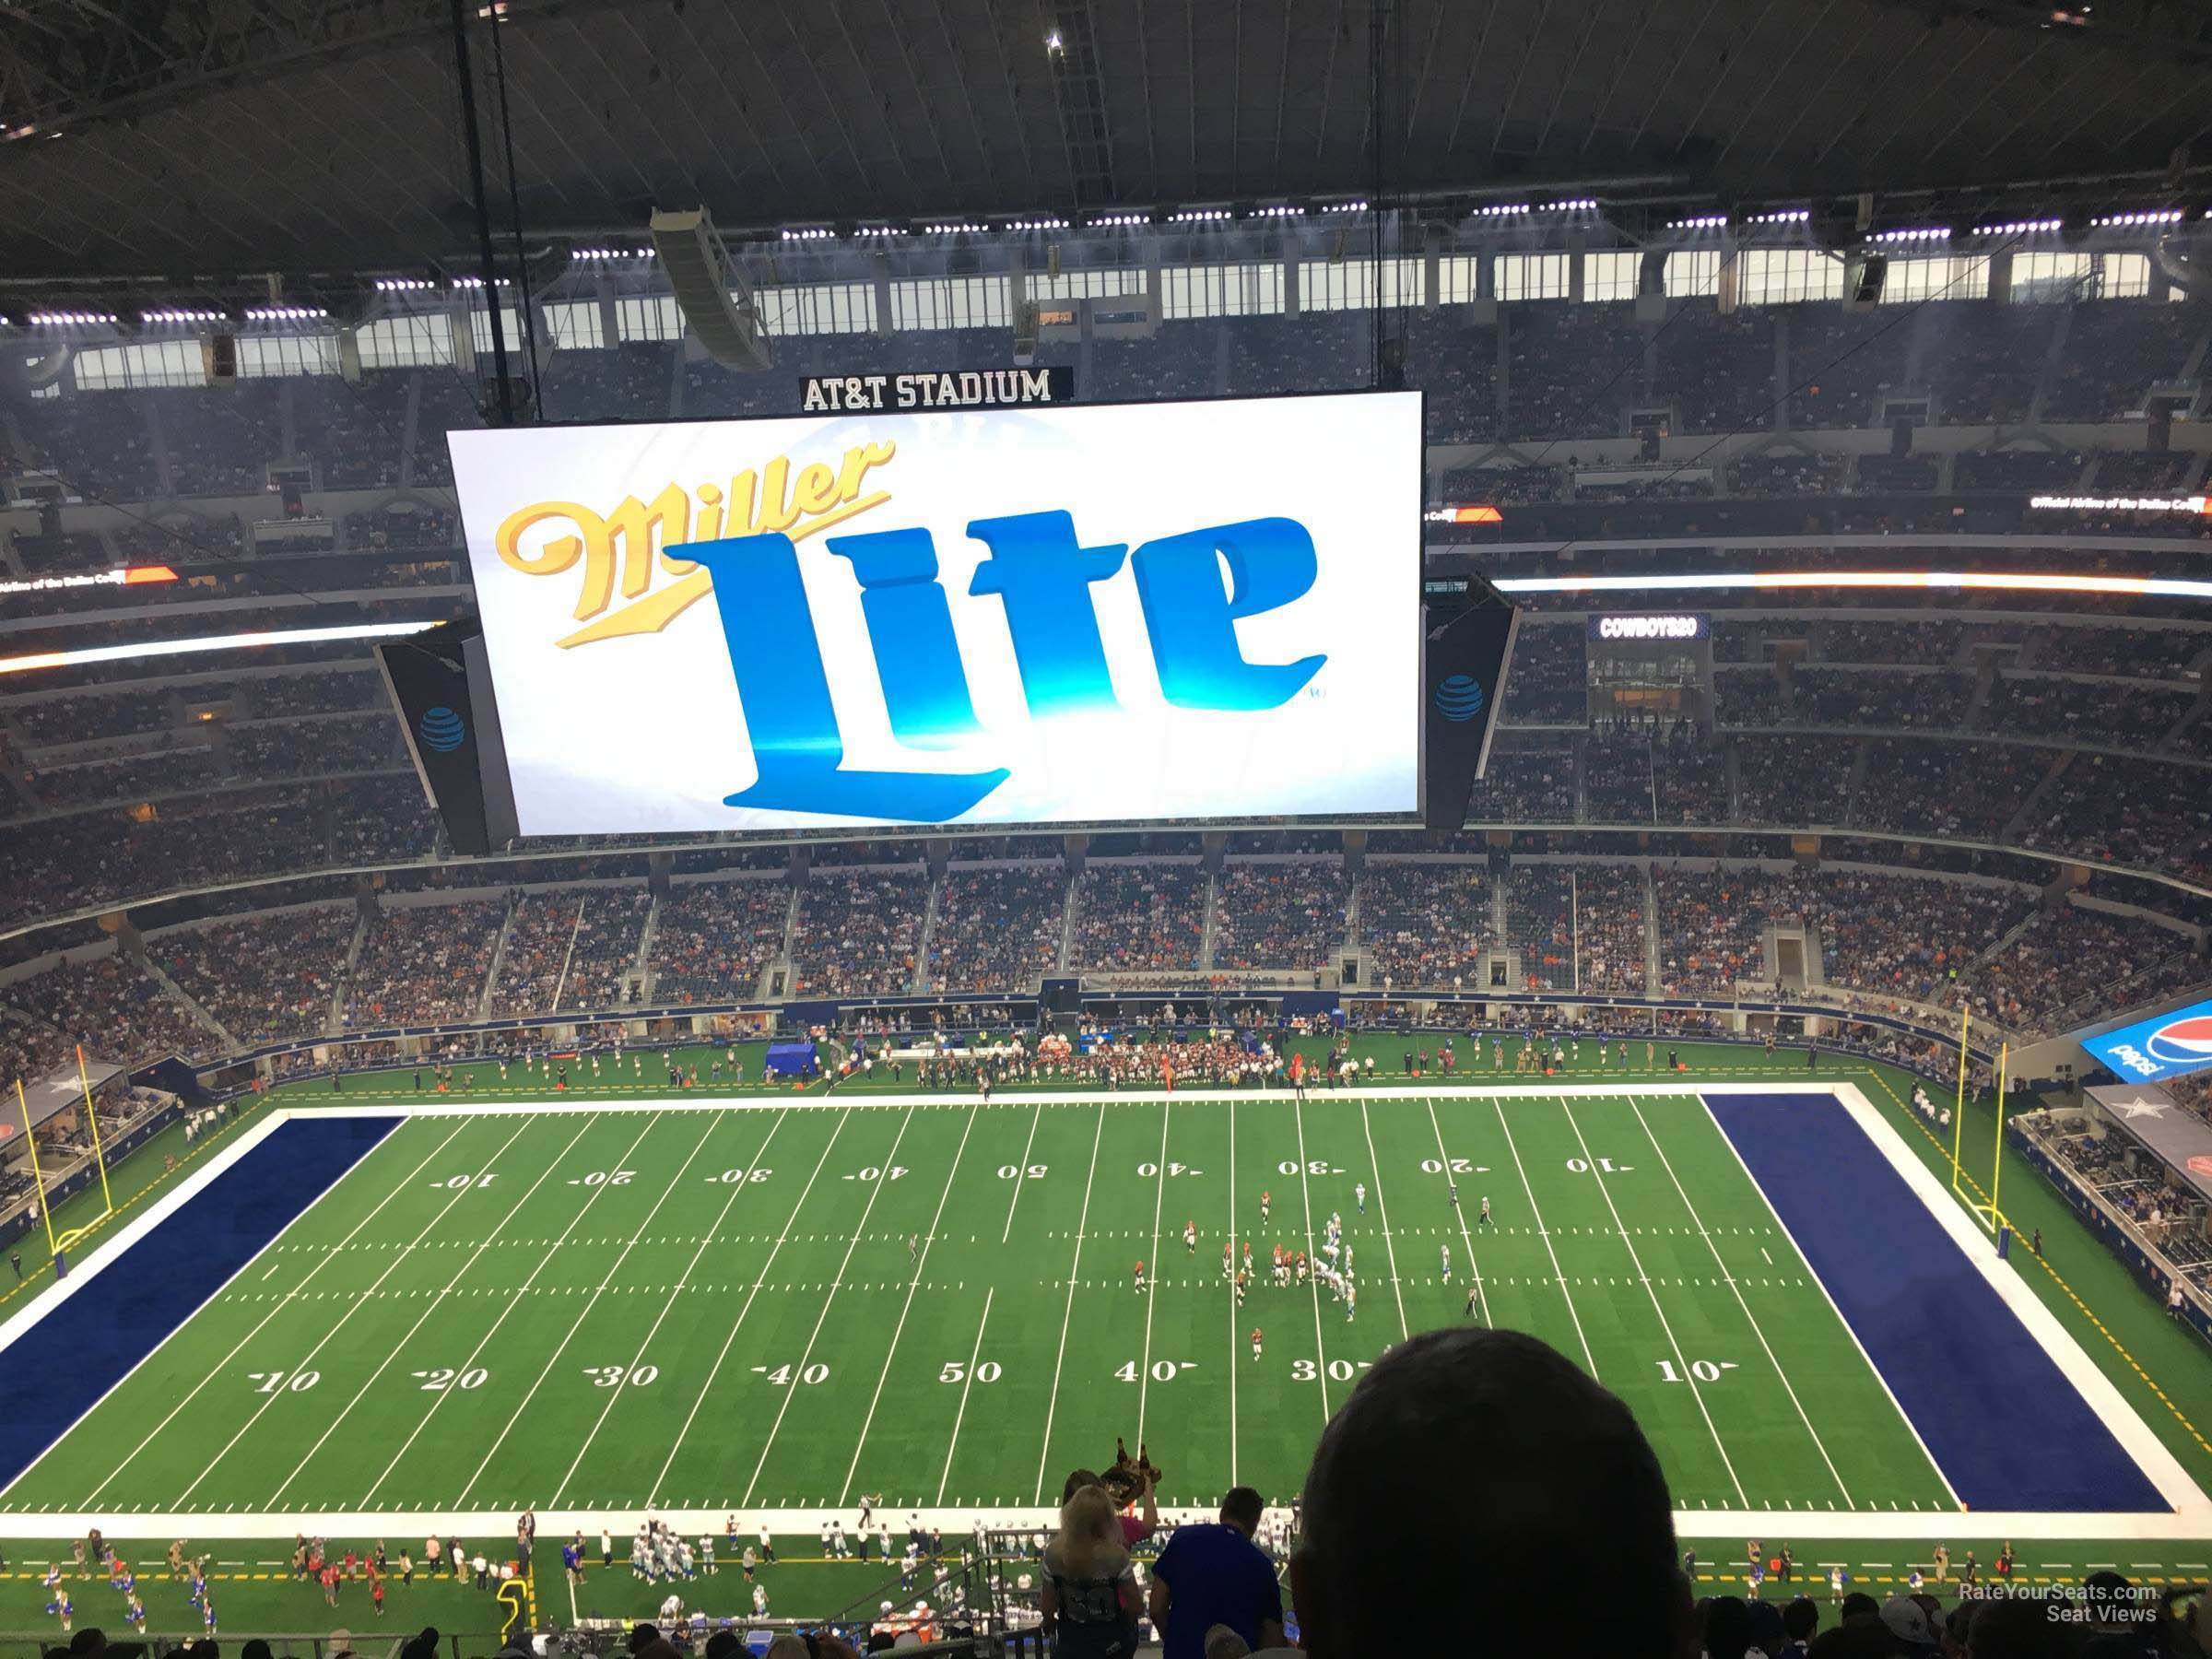 section 412, row 22 seat view  for football - at&t stadium (cowboys stadium)